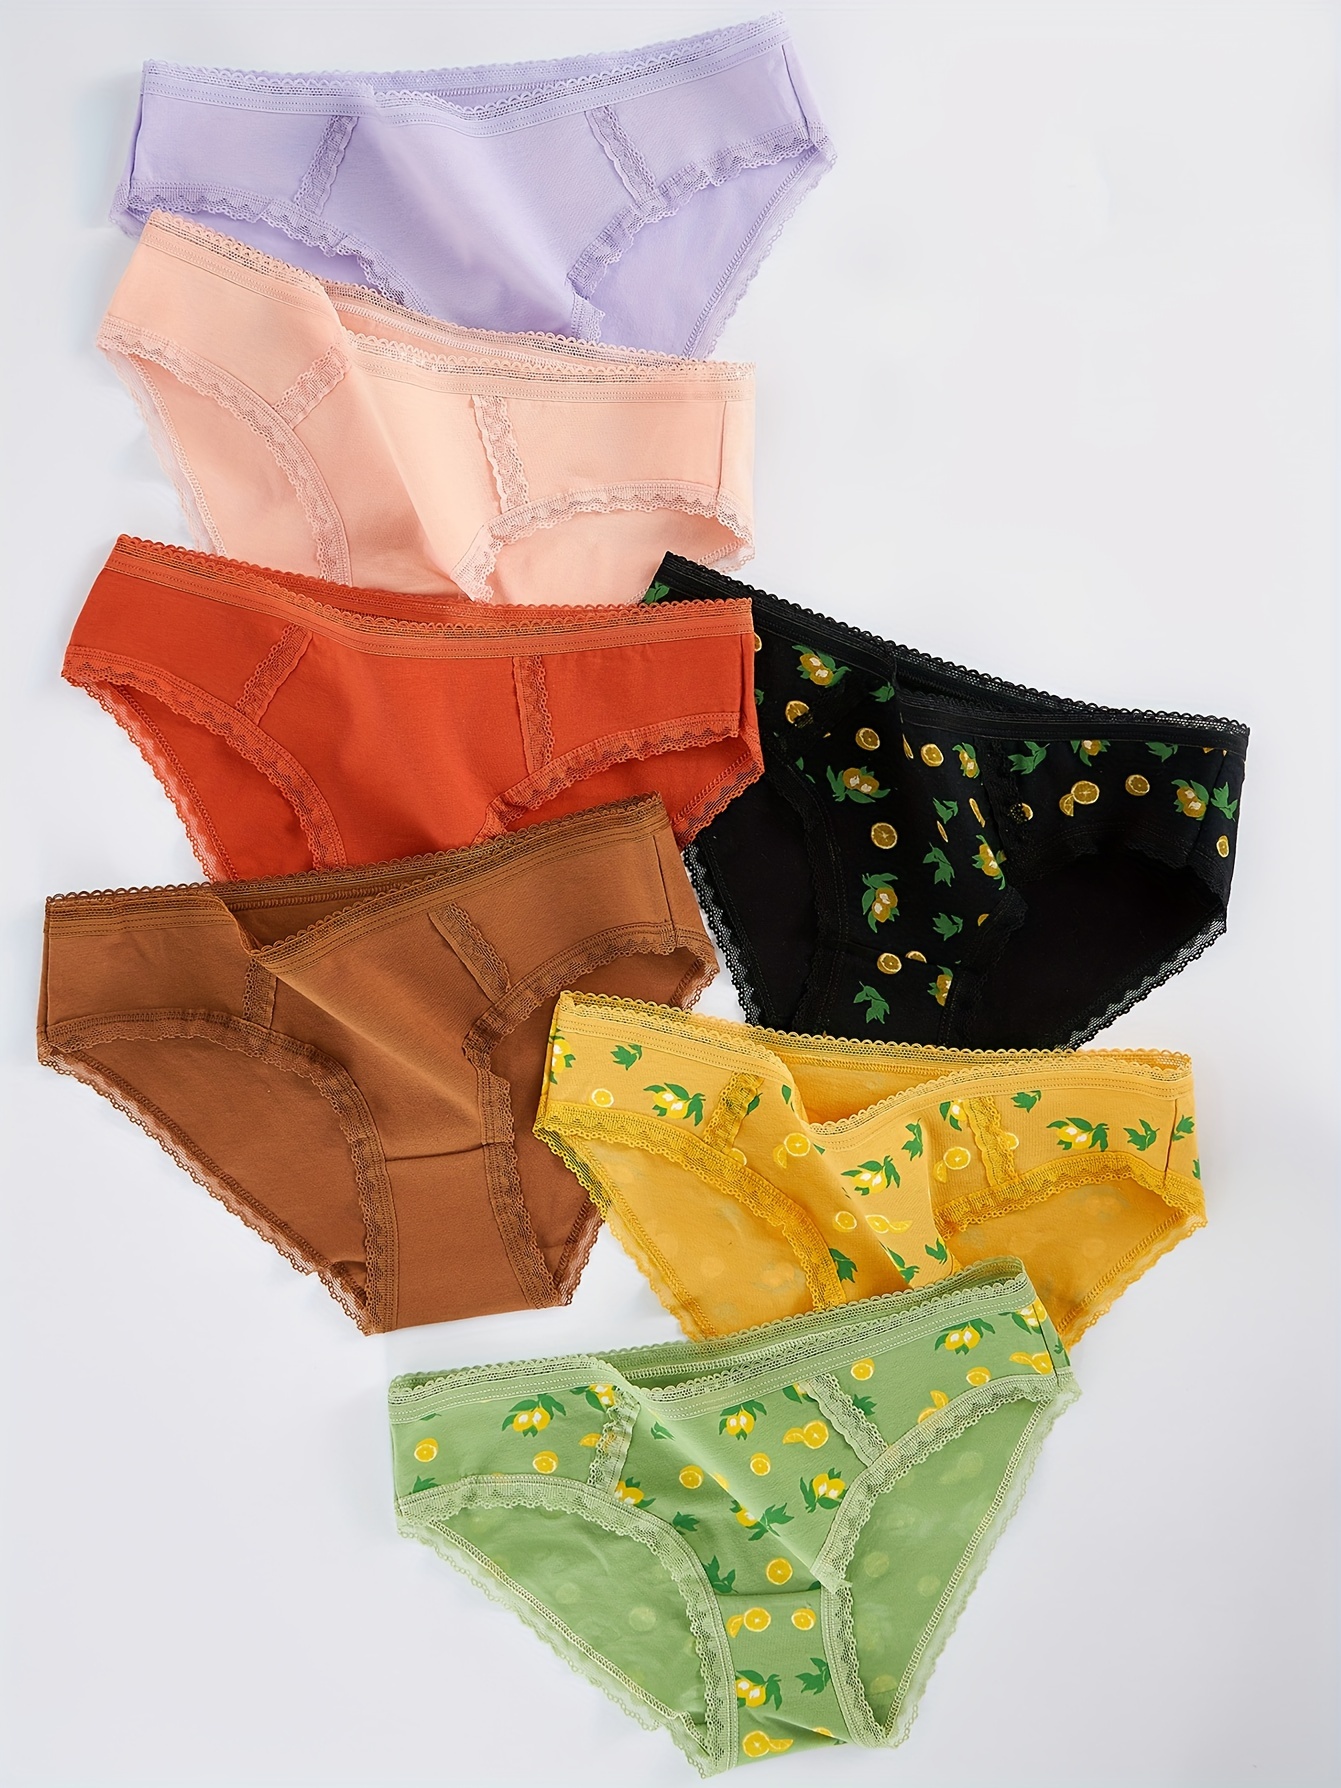 7Pcs Mix Color Cotton Panties Women Underwear Lovely Young Girls